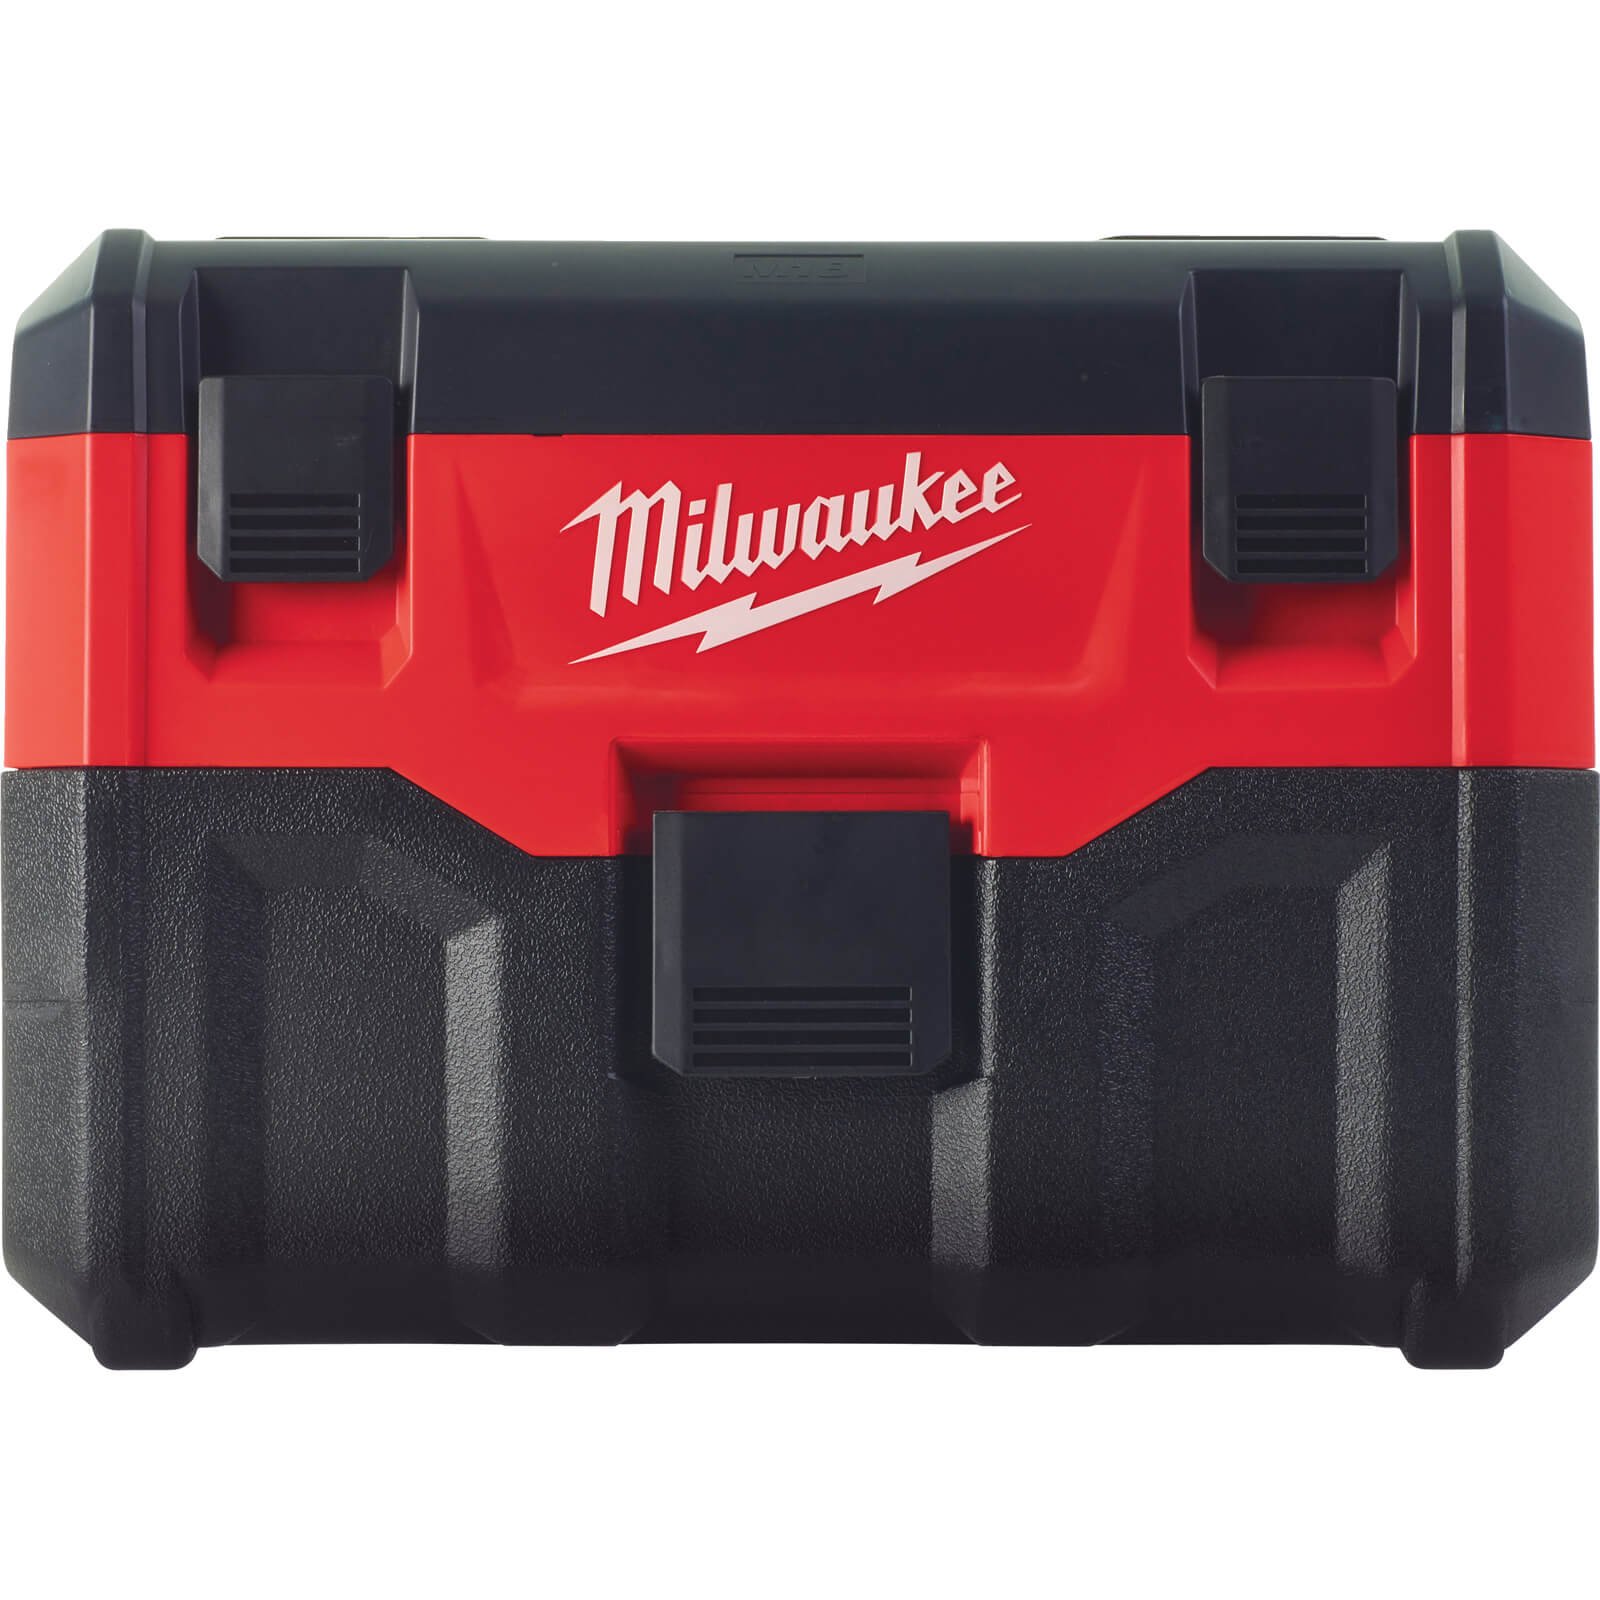 Image of Milwaukee M18 VC2 18v Cordless Wet and Dry Vacuum Cleaner No Batteries No Charger No Case